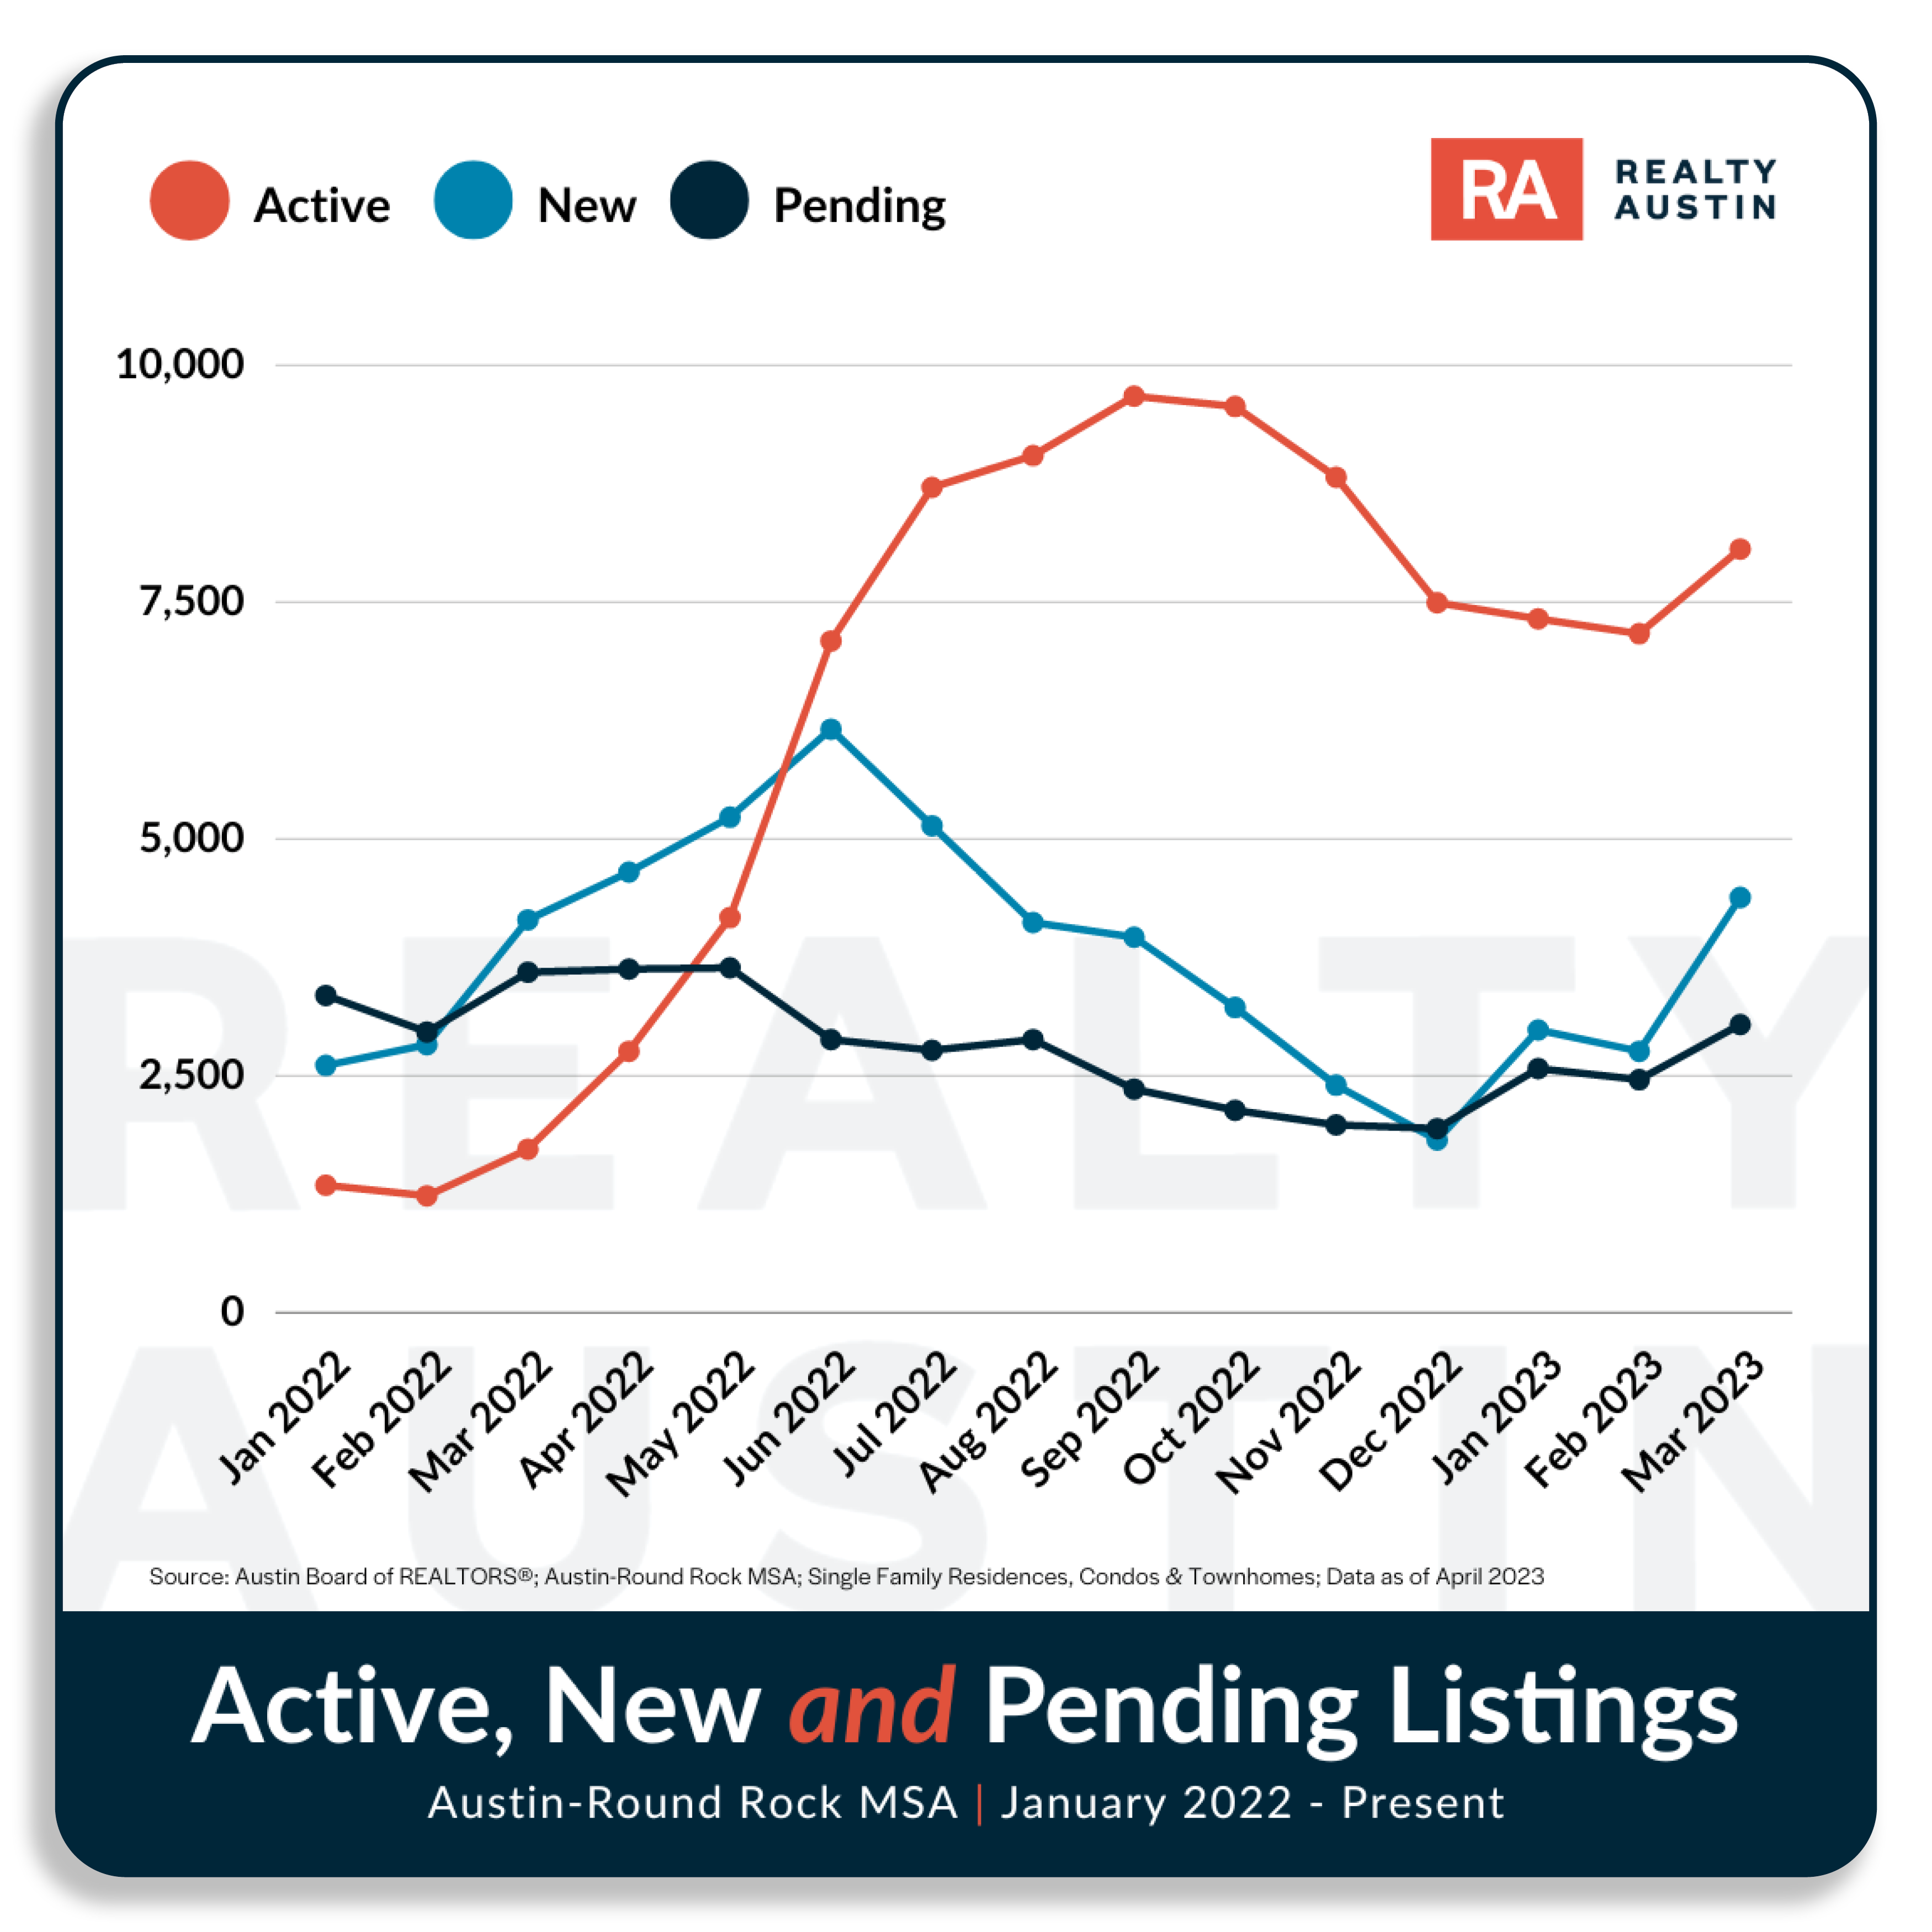 Active, New, Pending listings 2022 per month.